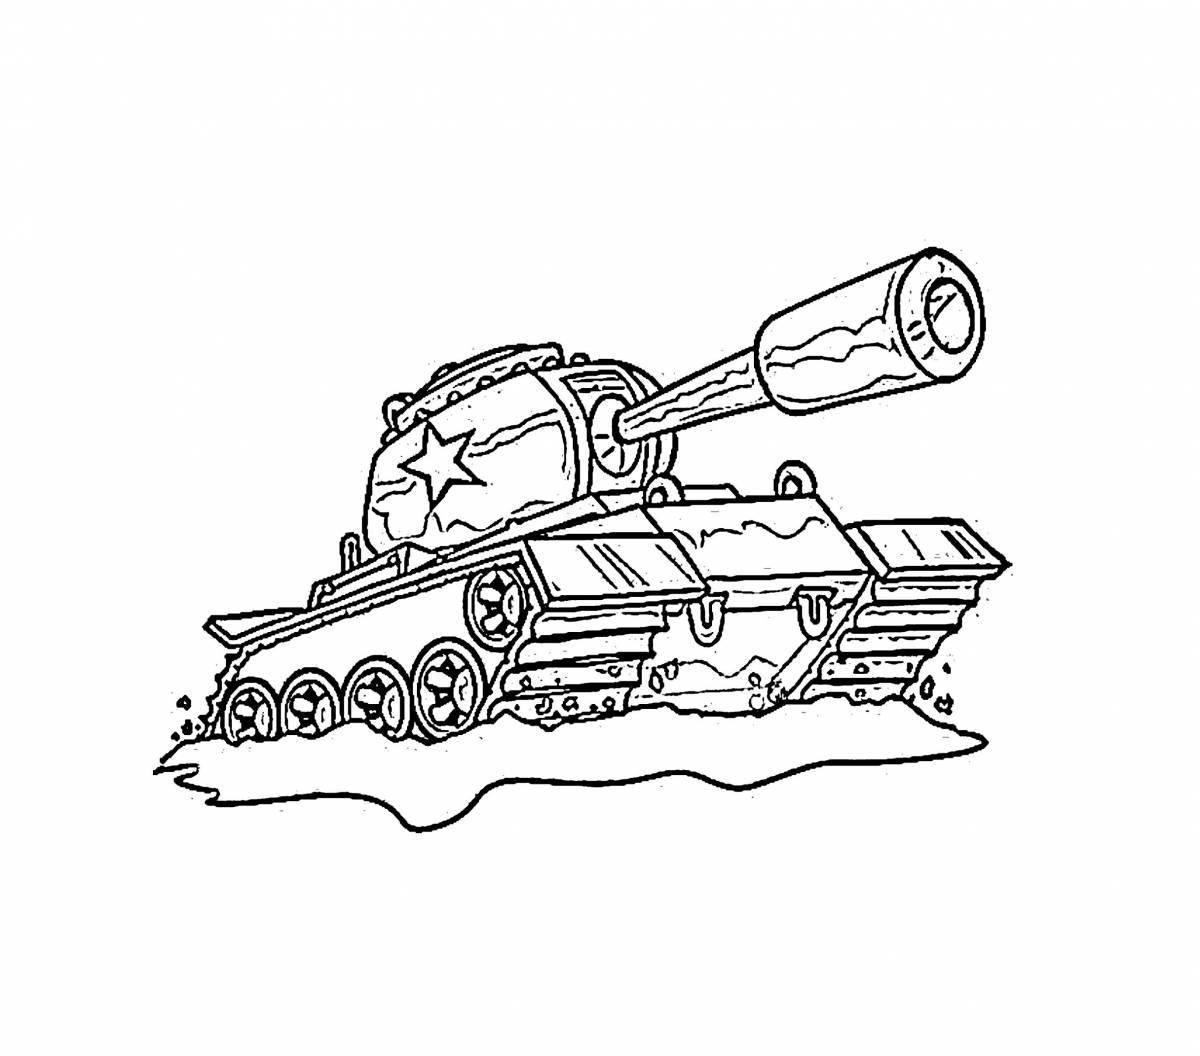 Coloring page spectacular tank kv44